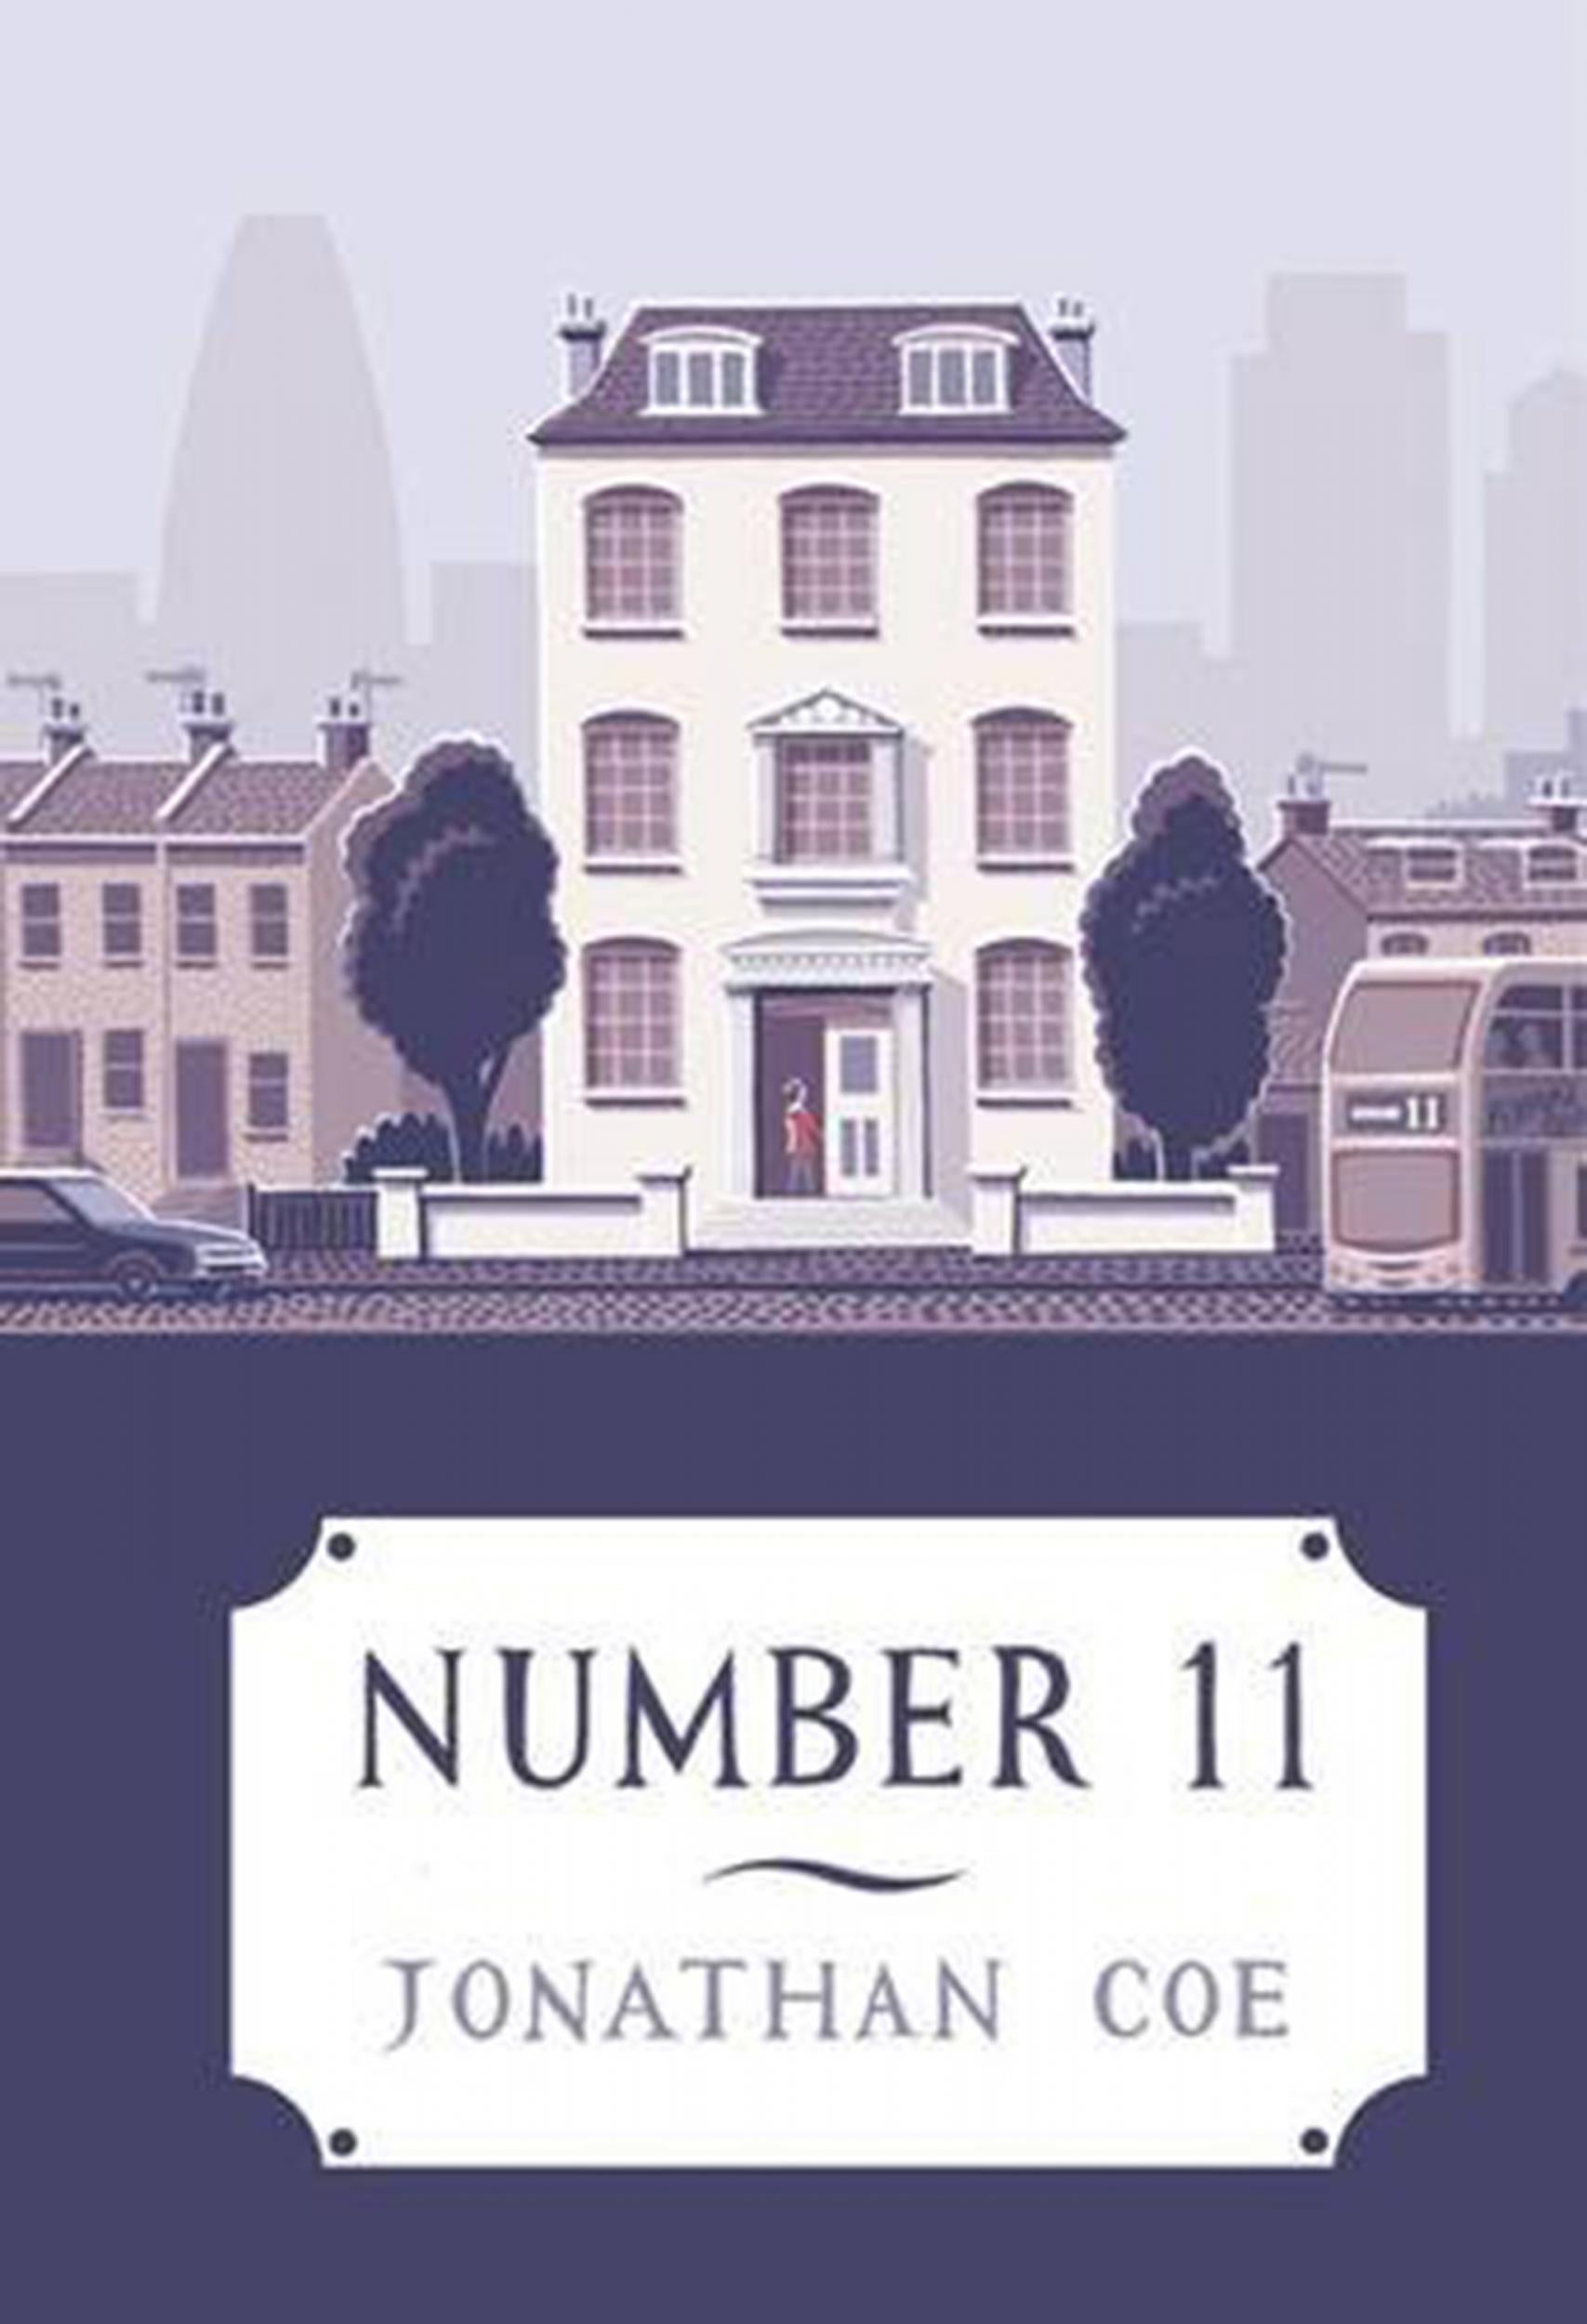 Coe's latest novel, Number 11, is published this week